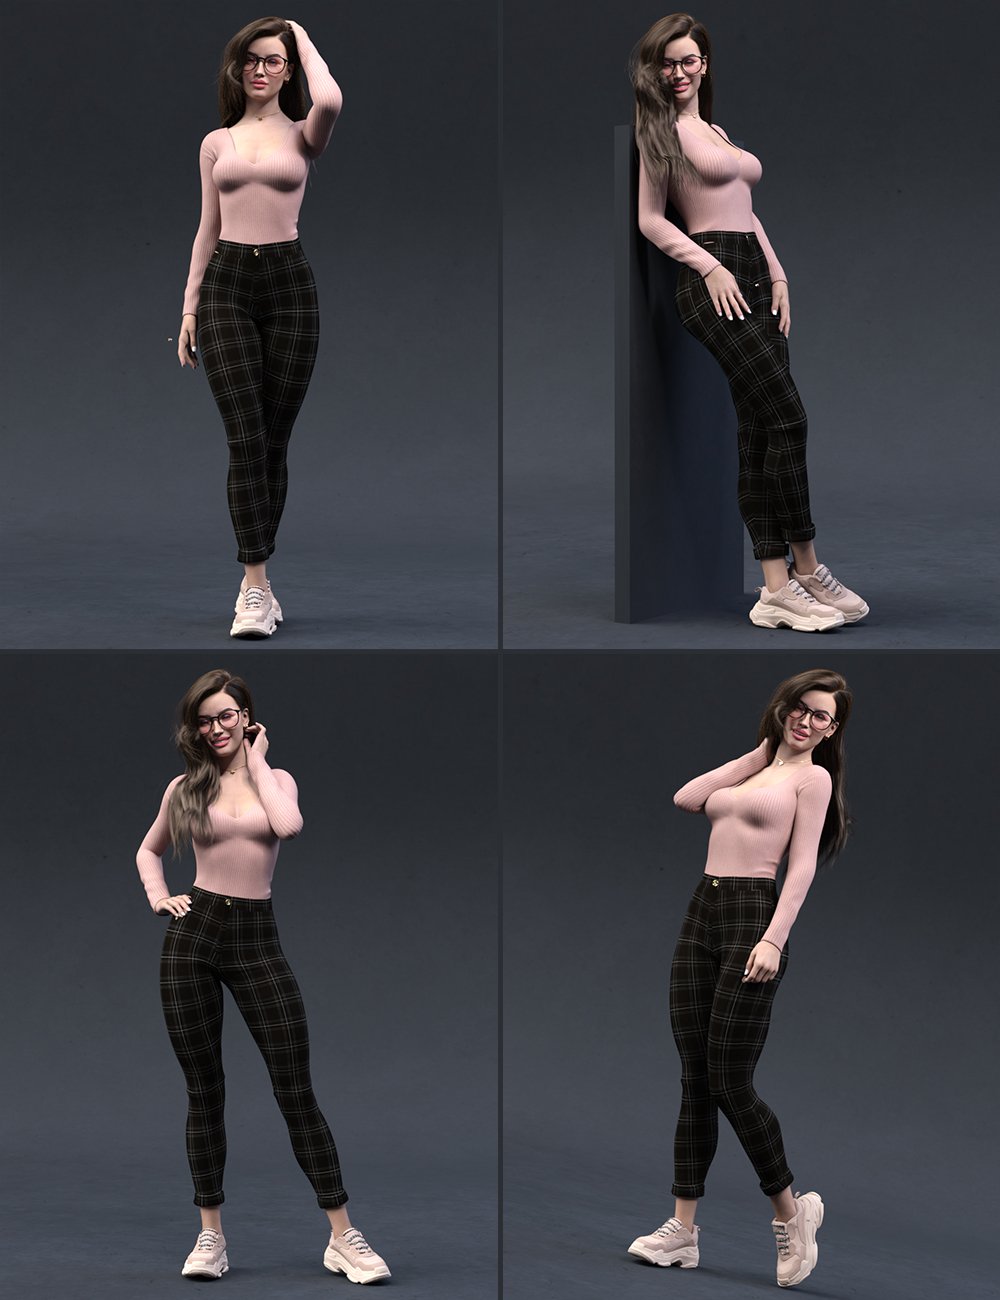 The Good Student Poses Sign Language and Expressions for Genesis 8 Female by: 3D Sugar, 3D Models by Daz 3D